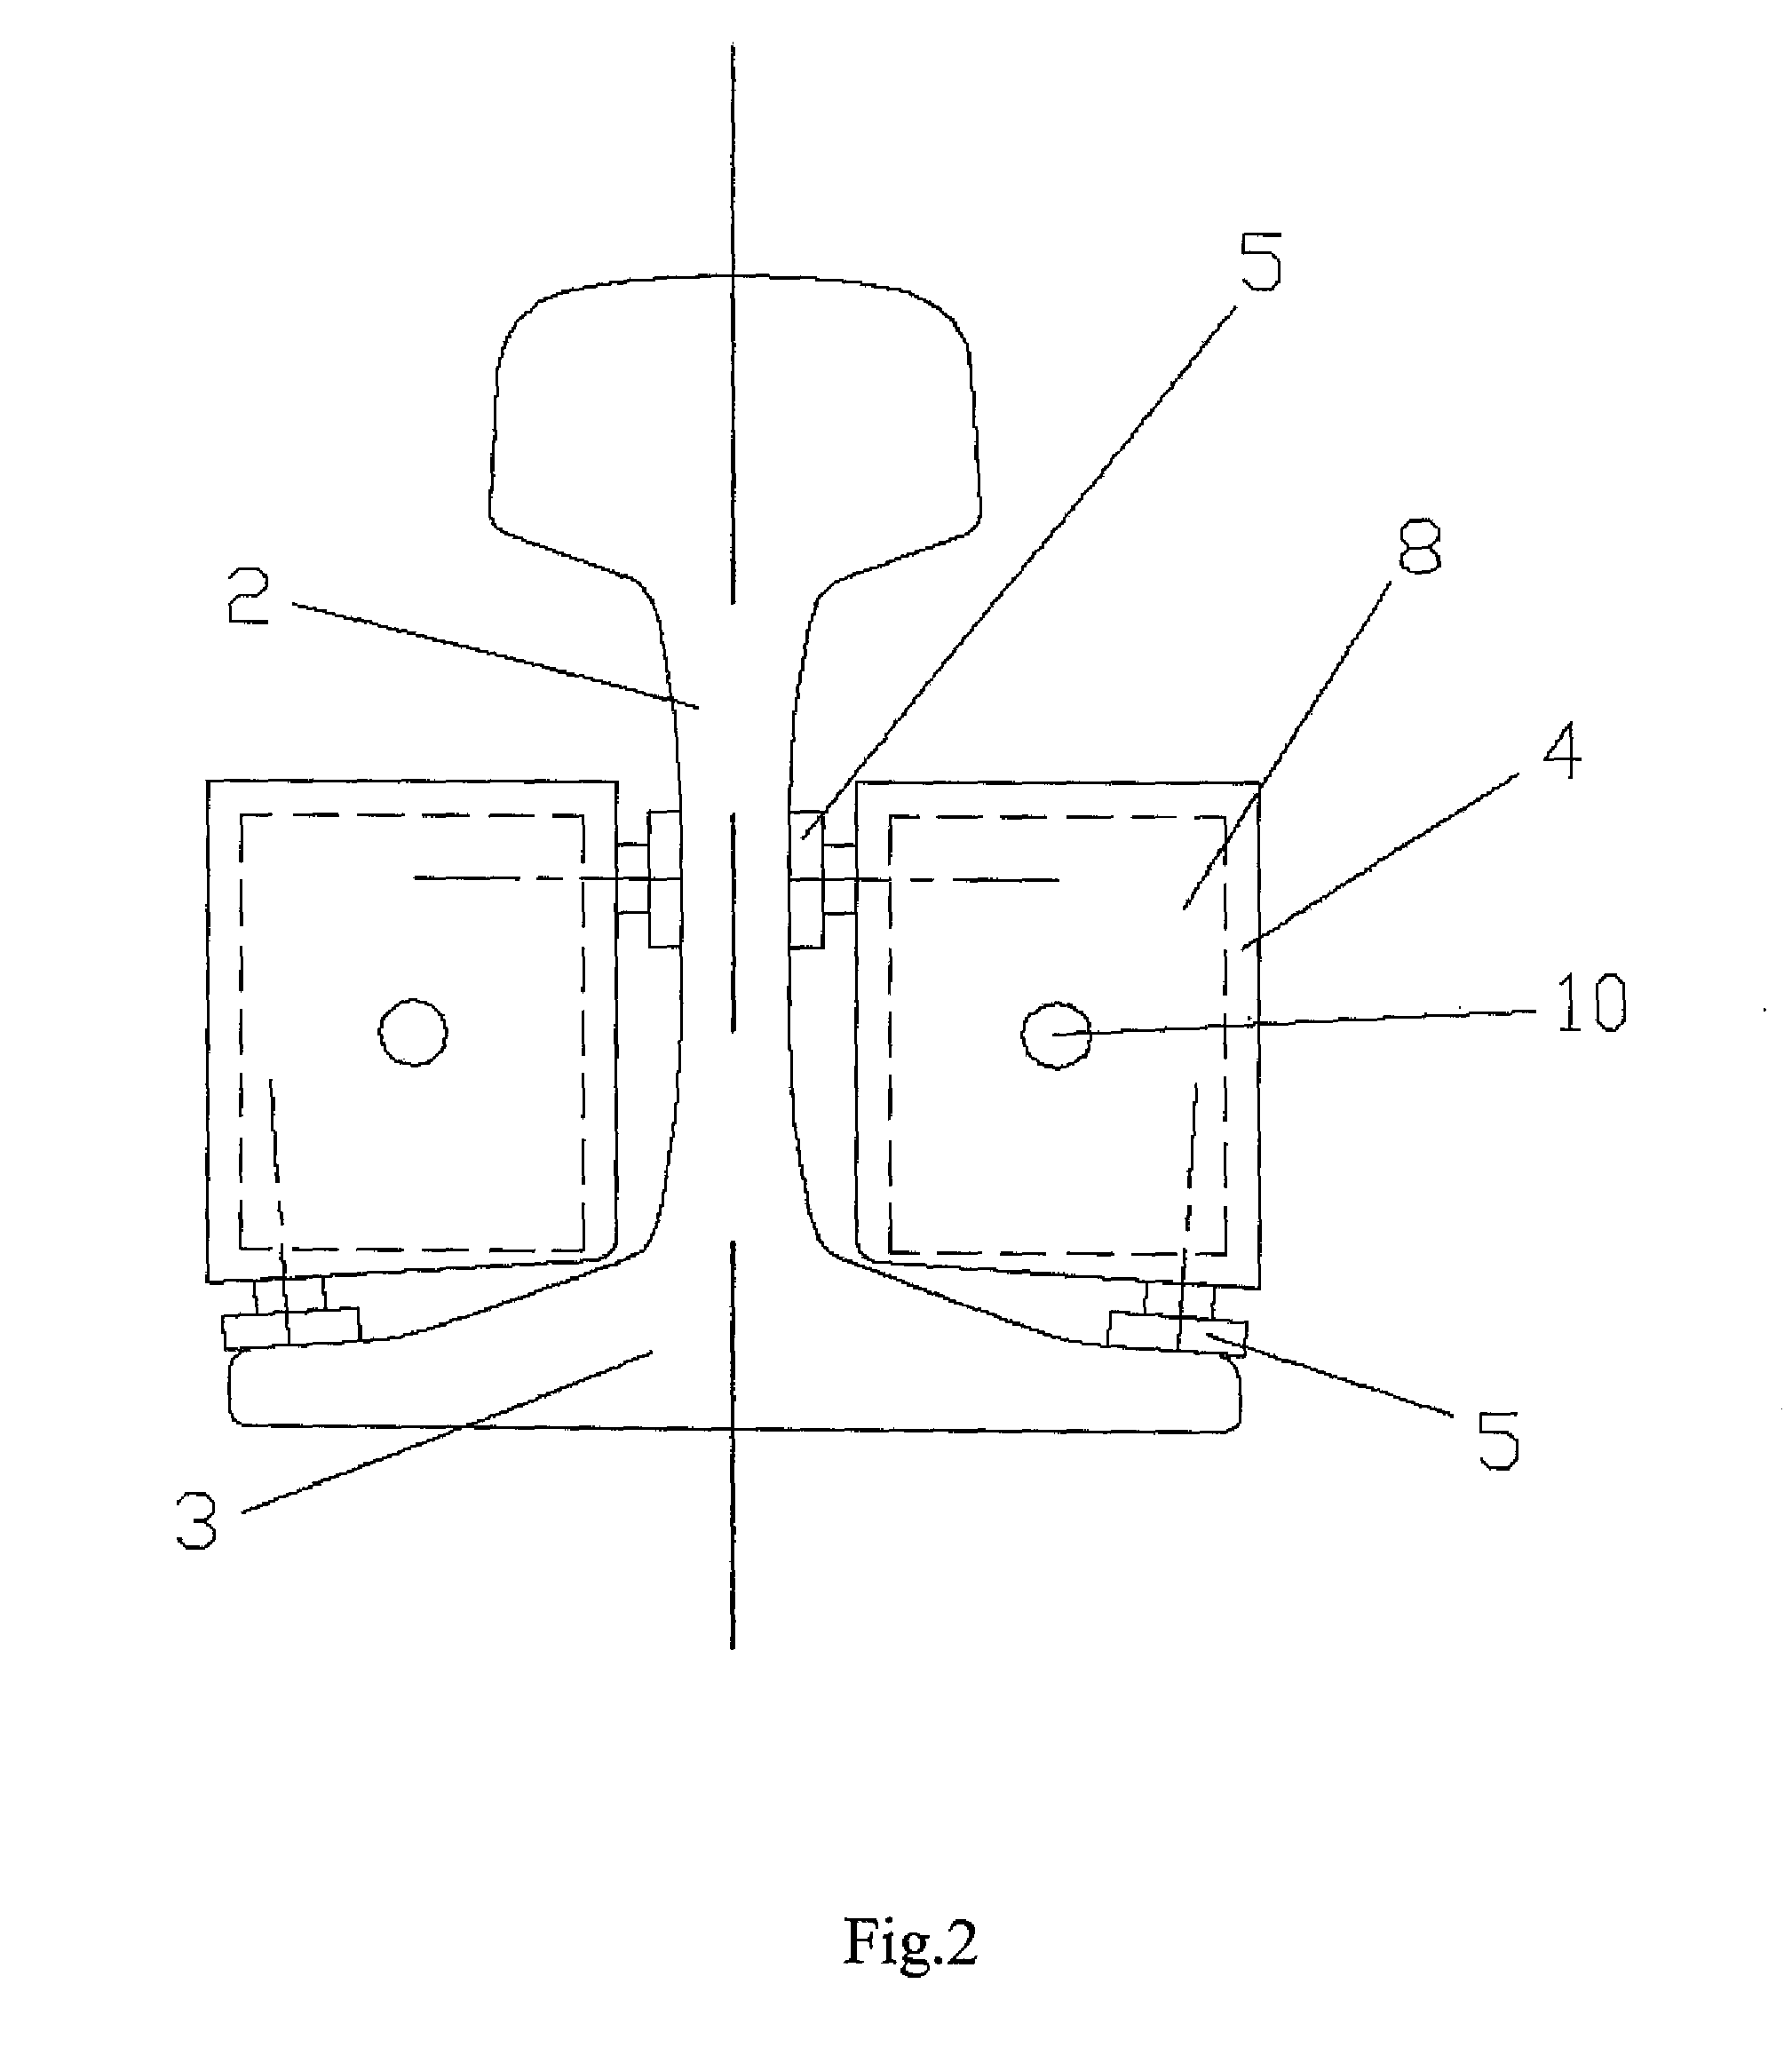 Tunable Vibration Absorbing Device